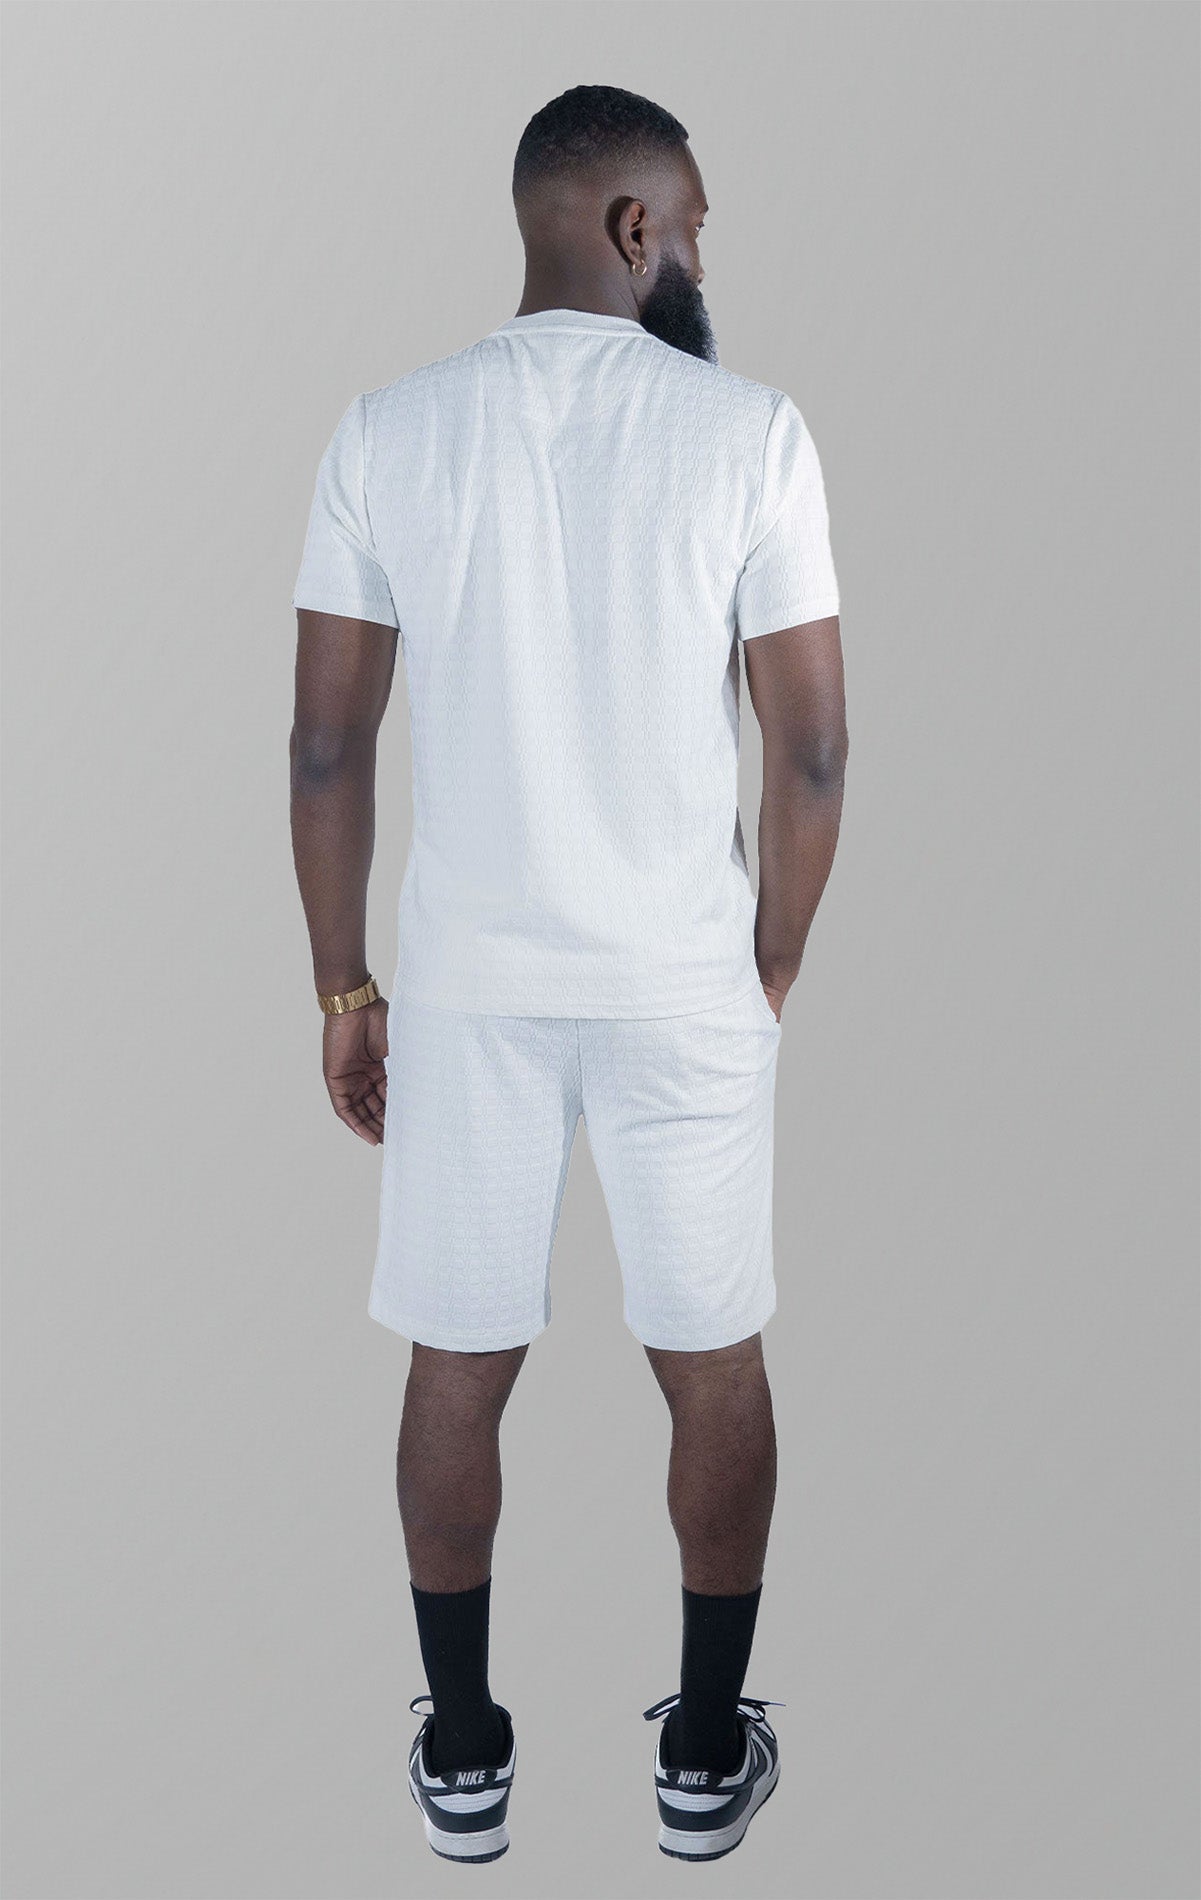 White Modena Knit Tee. Made from a high-quality blend of 95% cotton and 5% spandex for a soft and comfortable feel. Features a unique embossed jacquard fabric with colored blocking for a textured and stylish look. This tee is pre-shrunk and true to size.